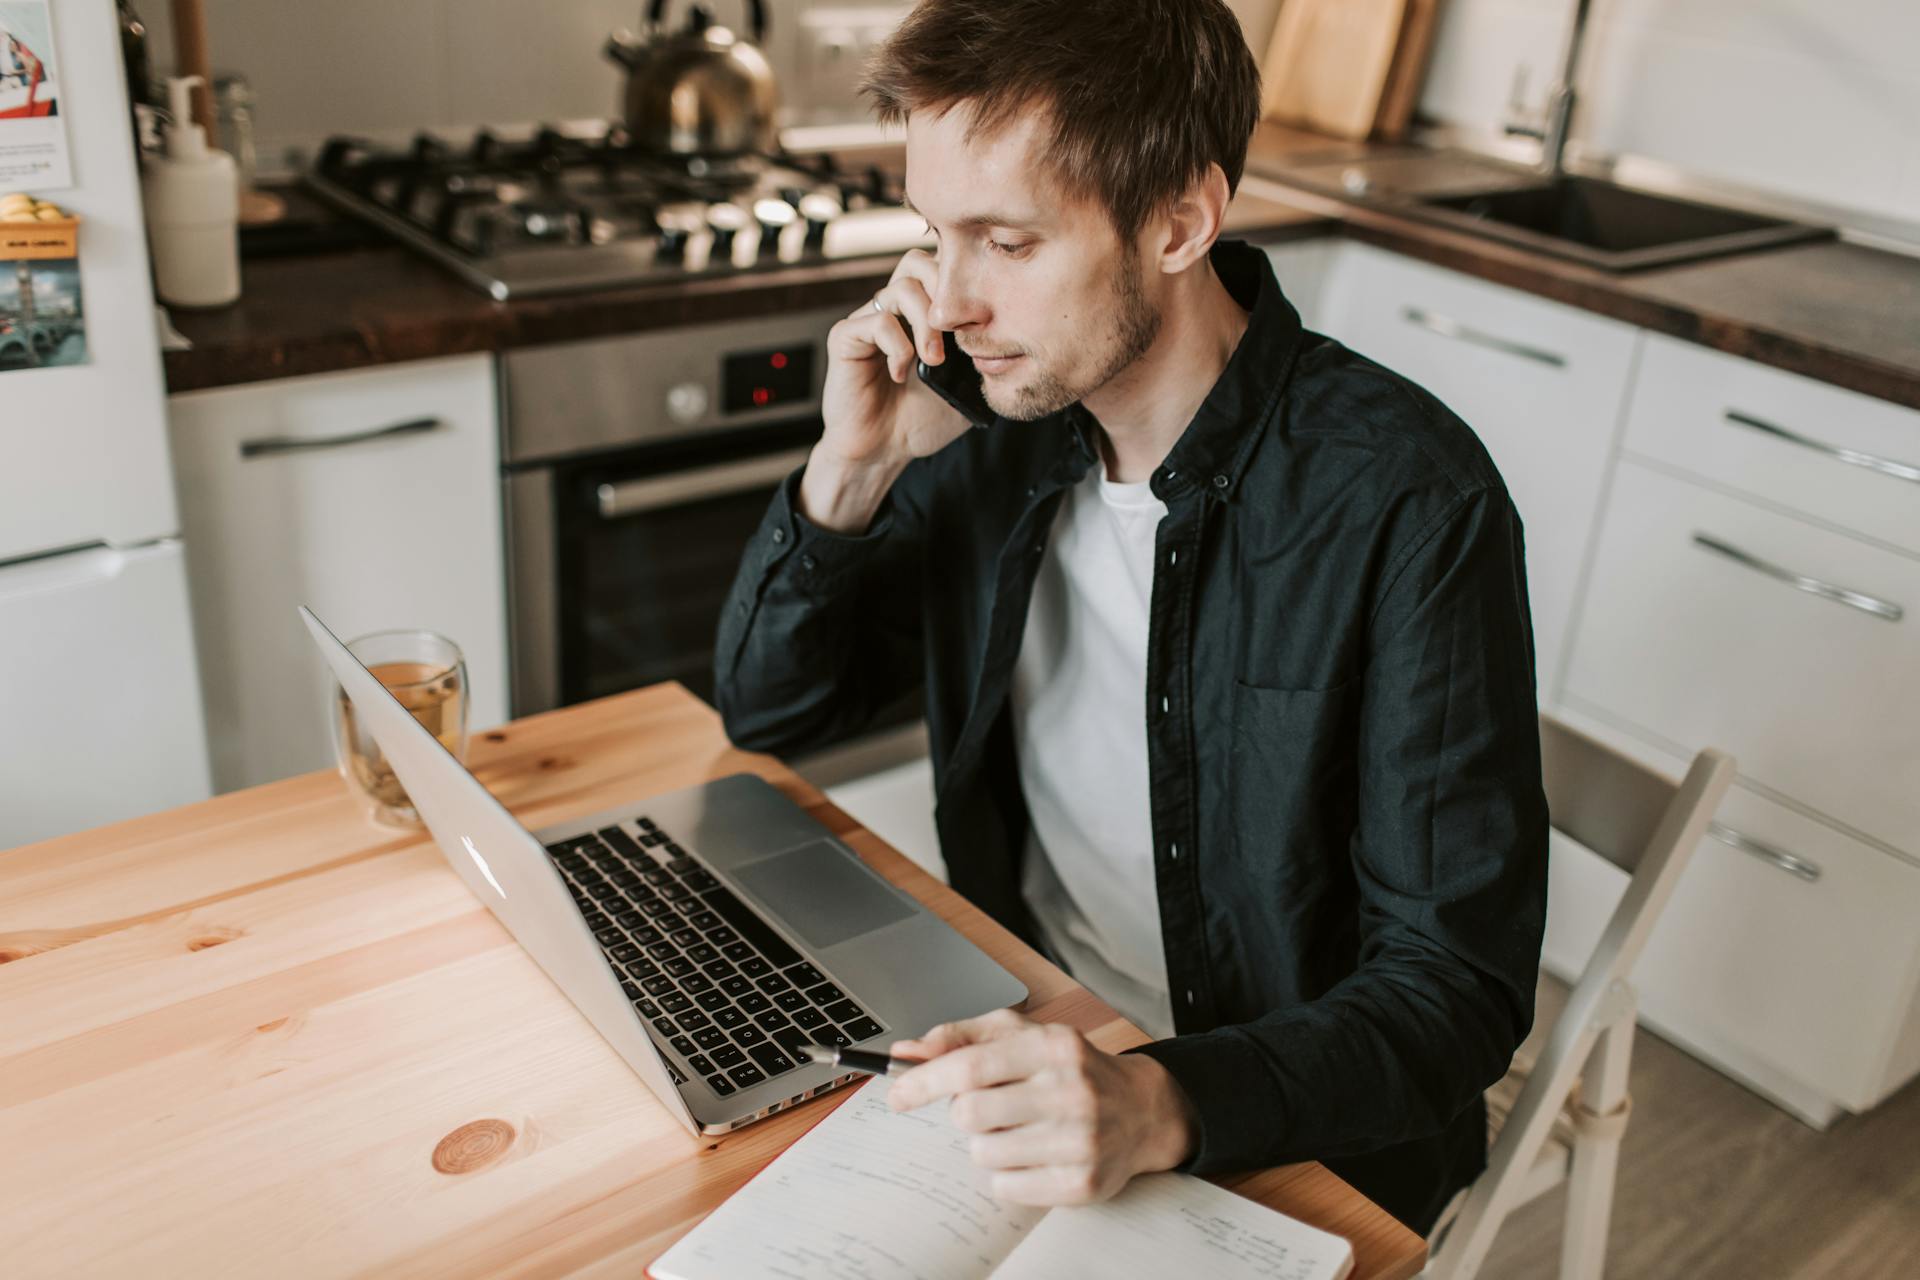 Mean seated at a kitchen table making a phone call | Source: Pexels